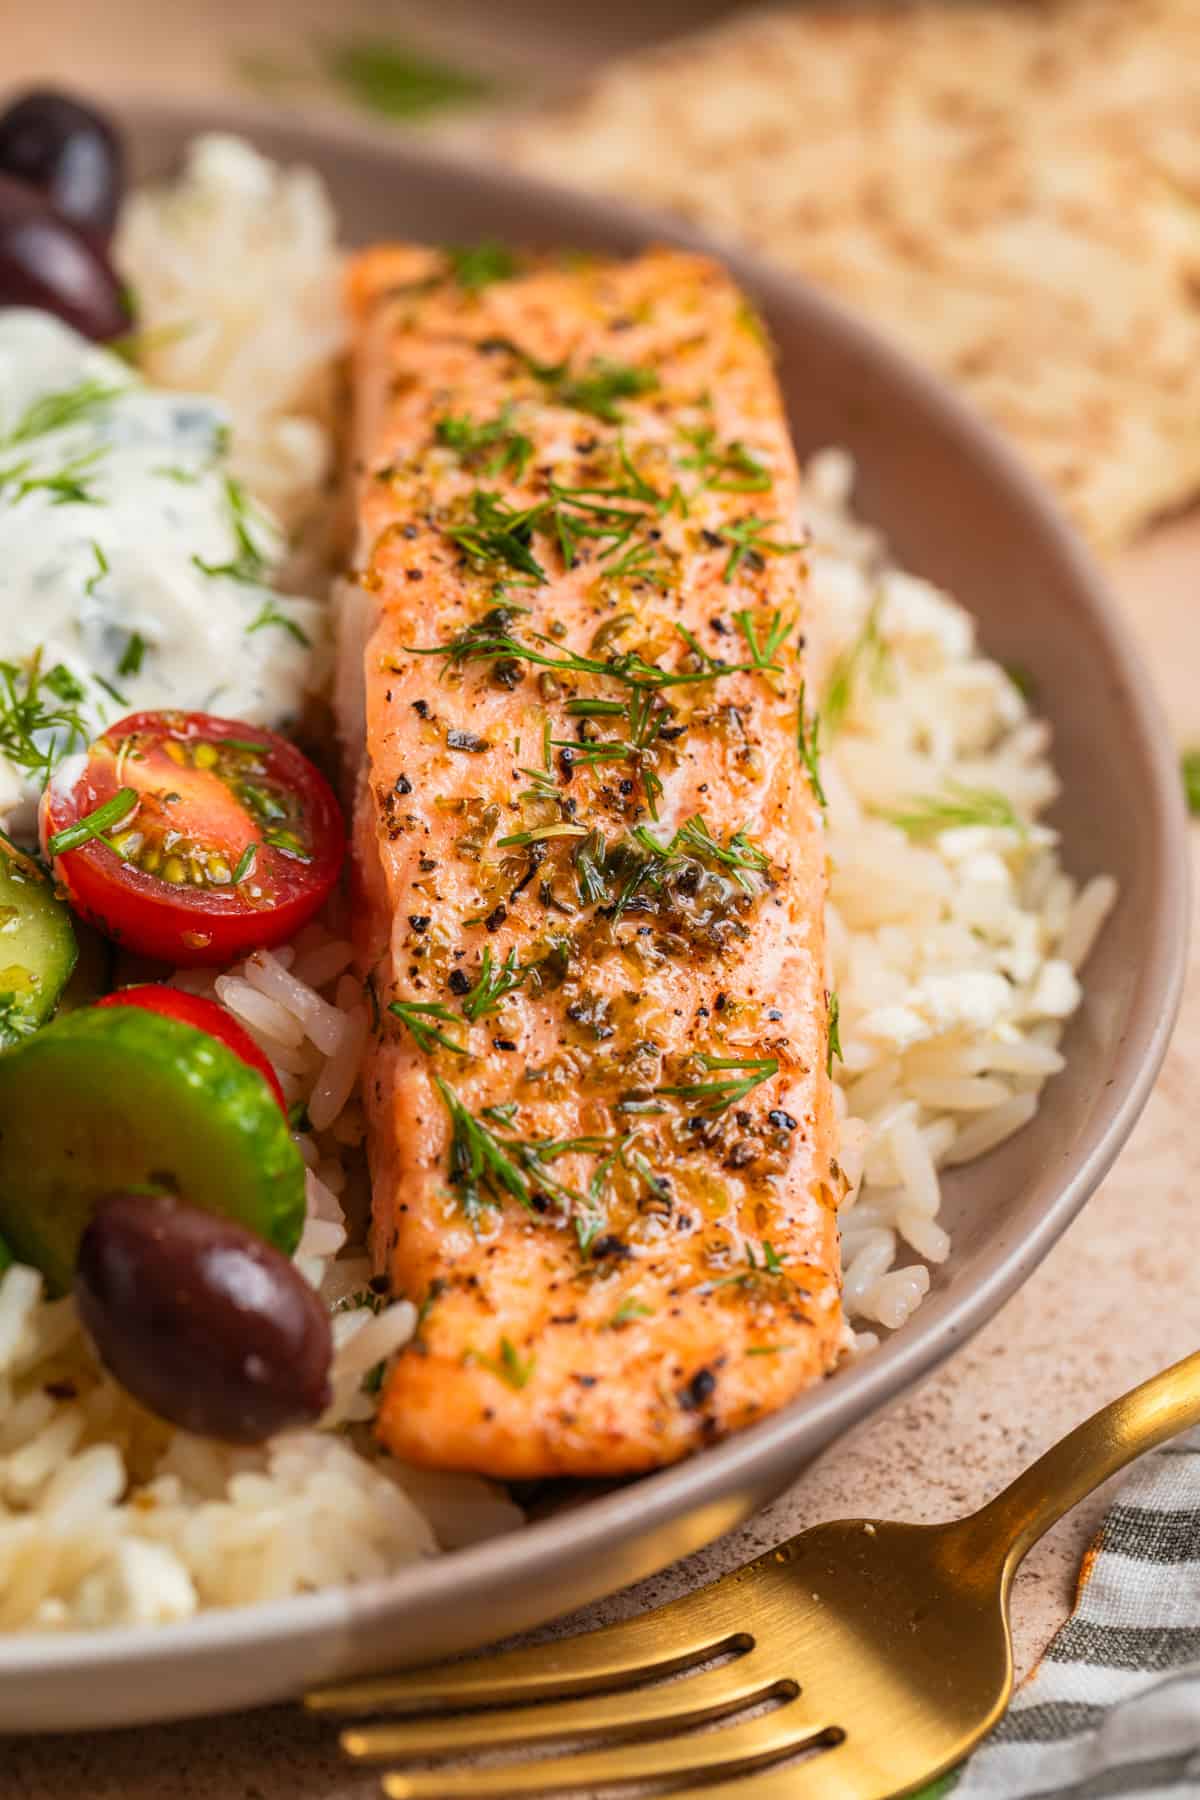 Greek salmon over a bed of rice with cucumbers, tomatoes, tzatziki sauce and other toppings.